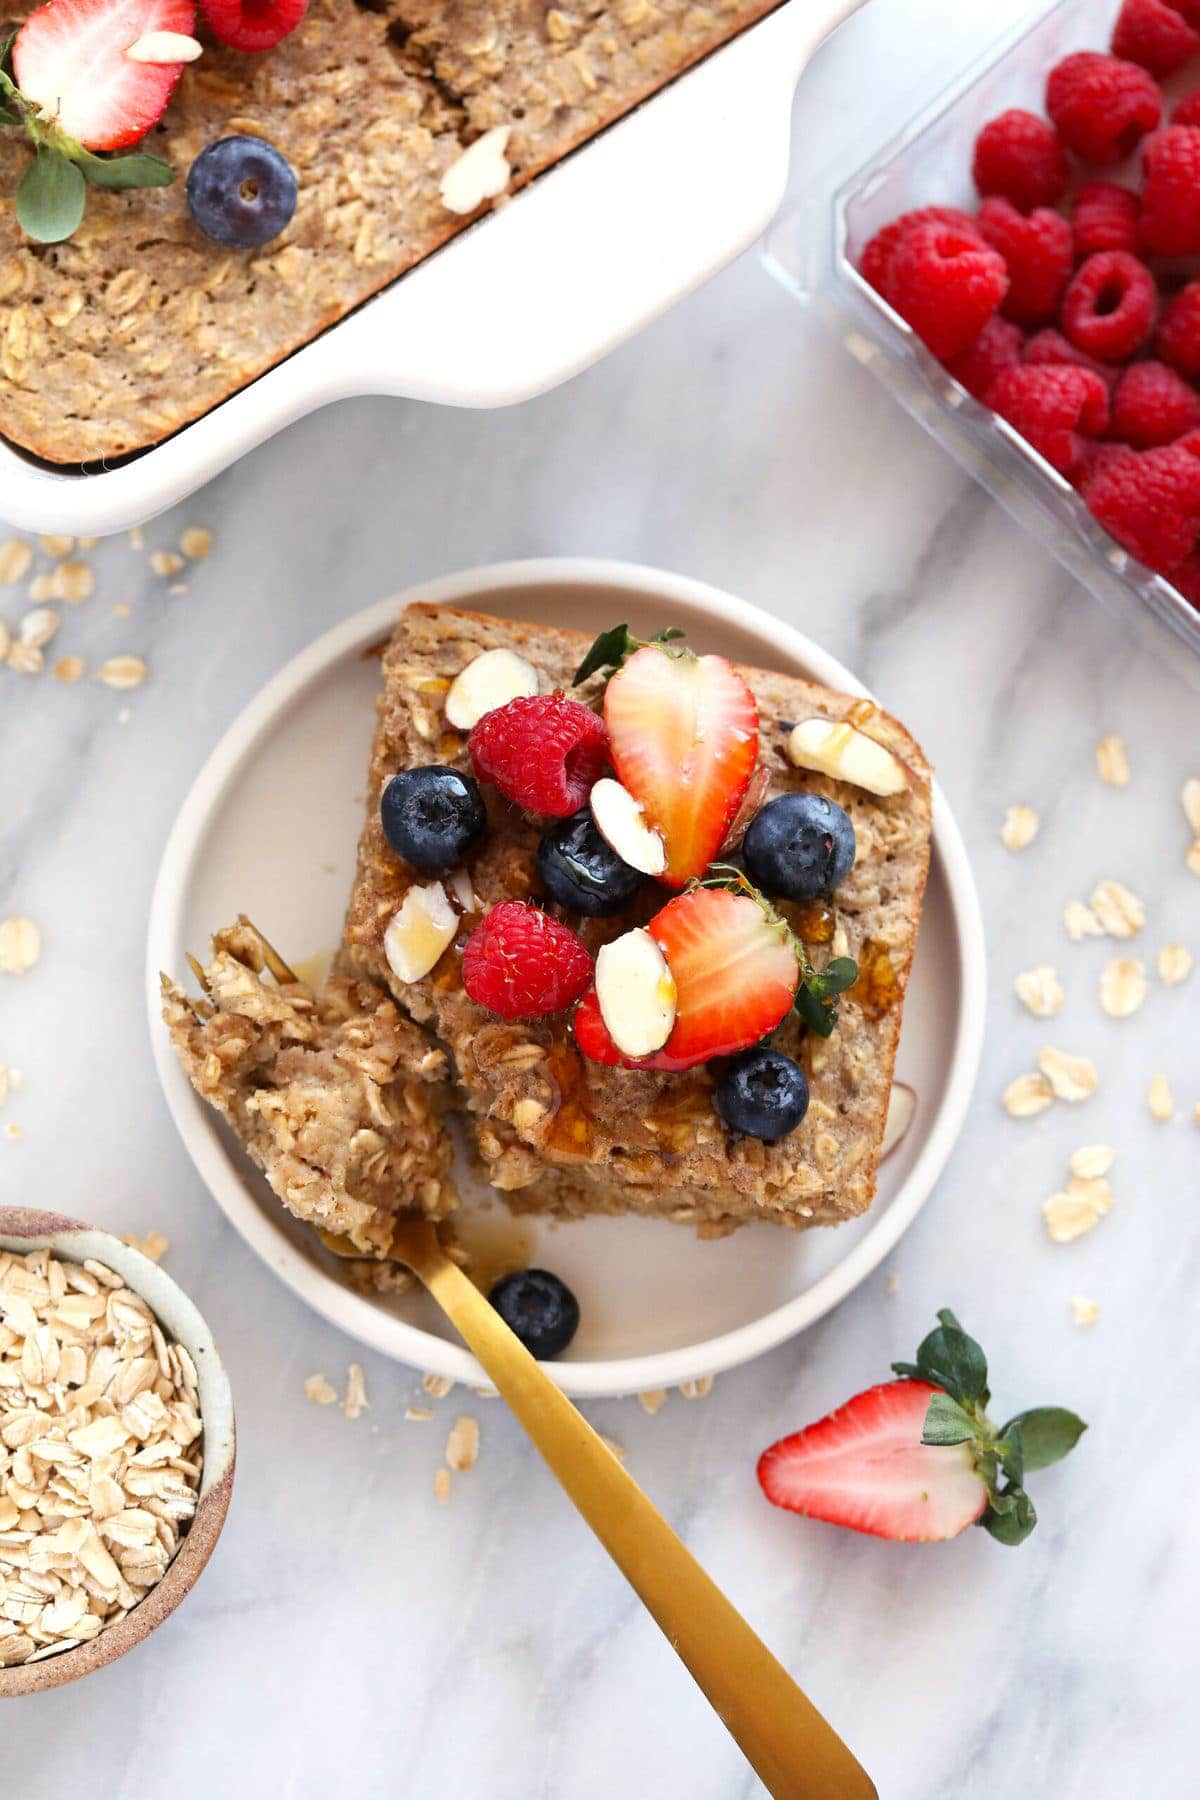 Best Baked Oatmeal (+ 15 Baked Oatmeal Recipes) - Fit Foodie Finds